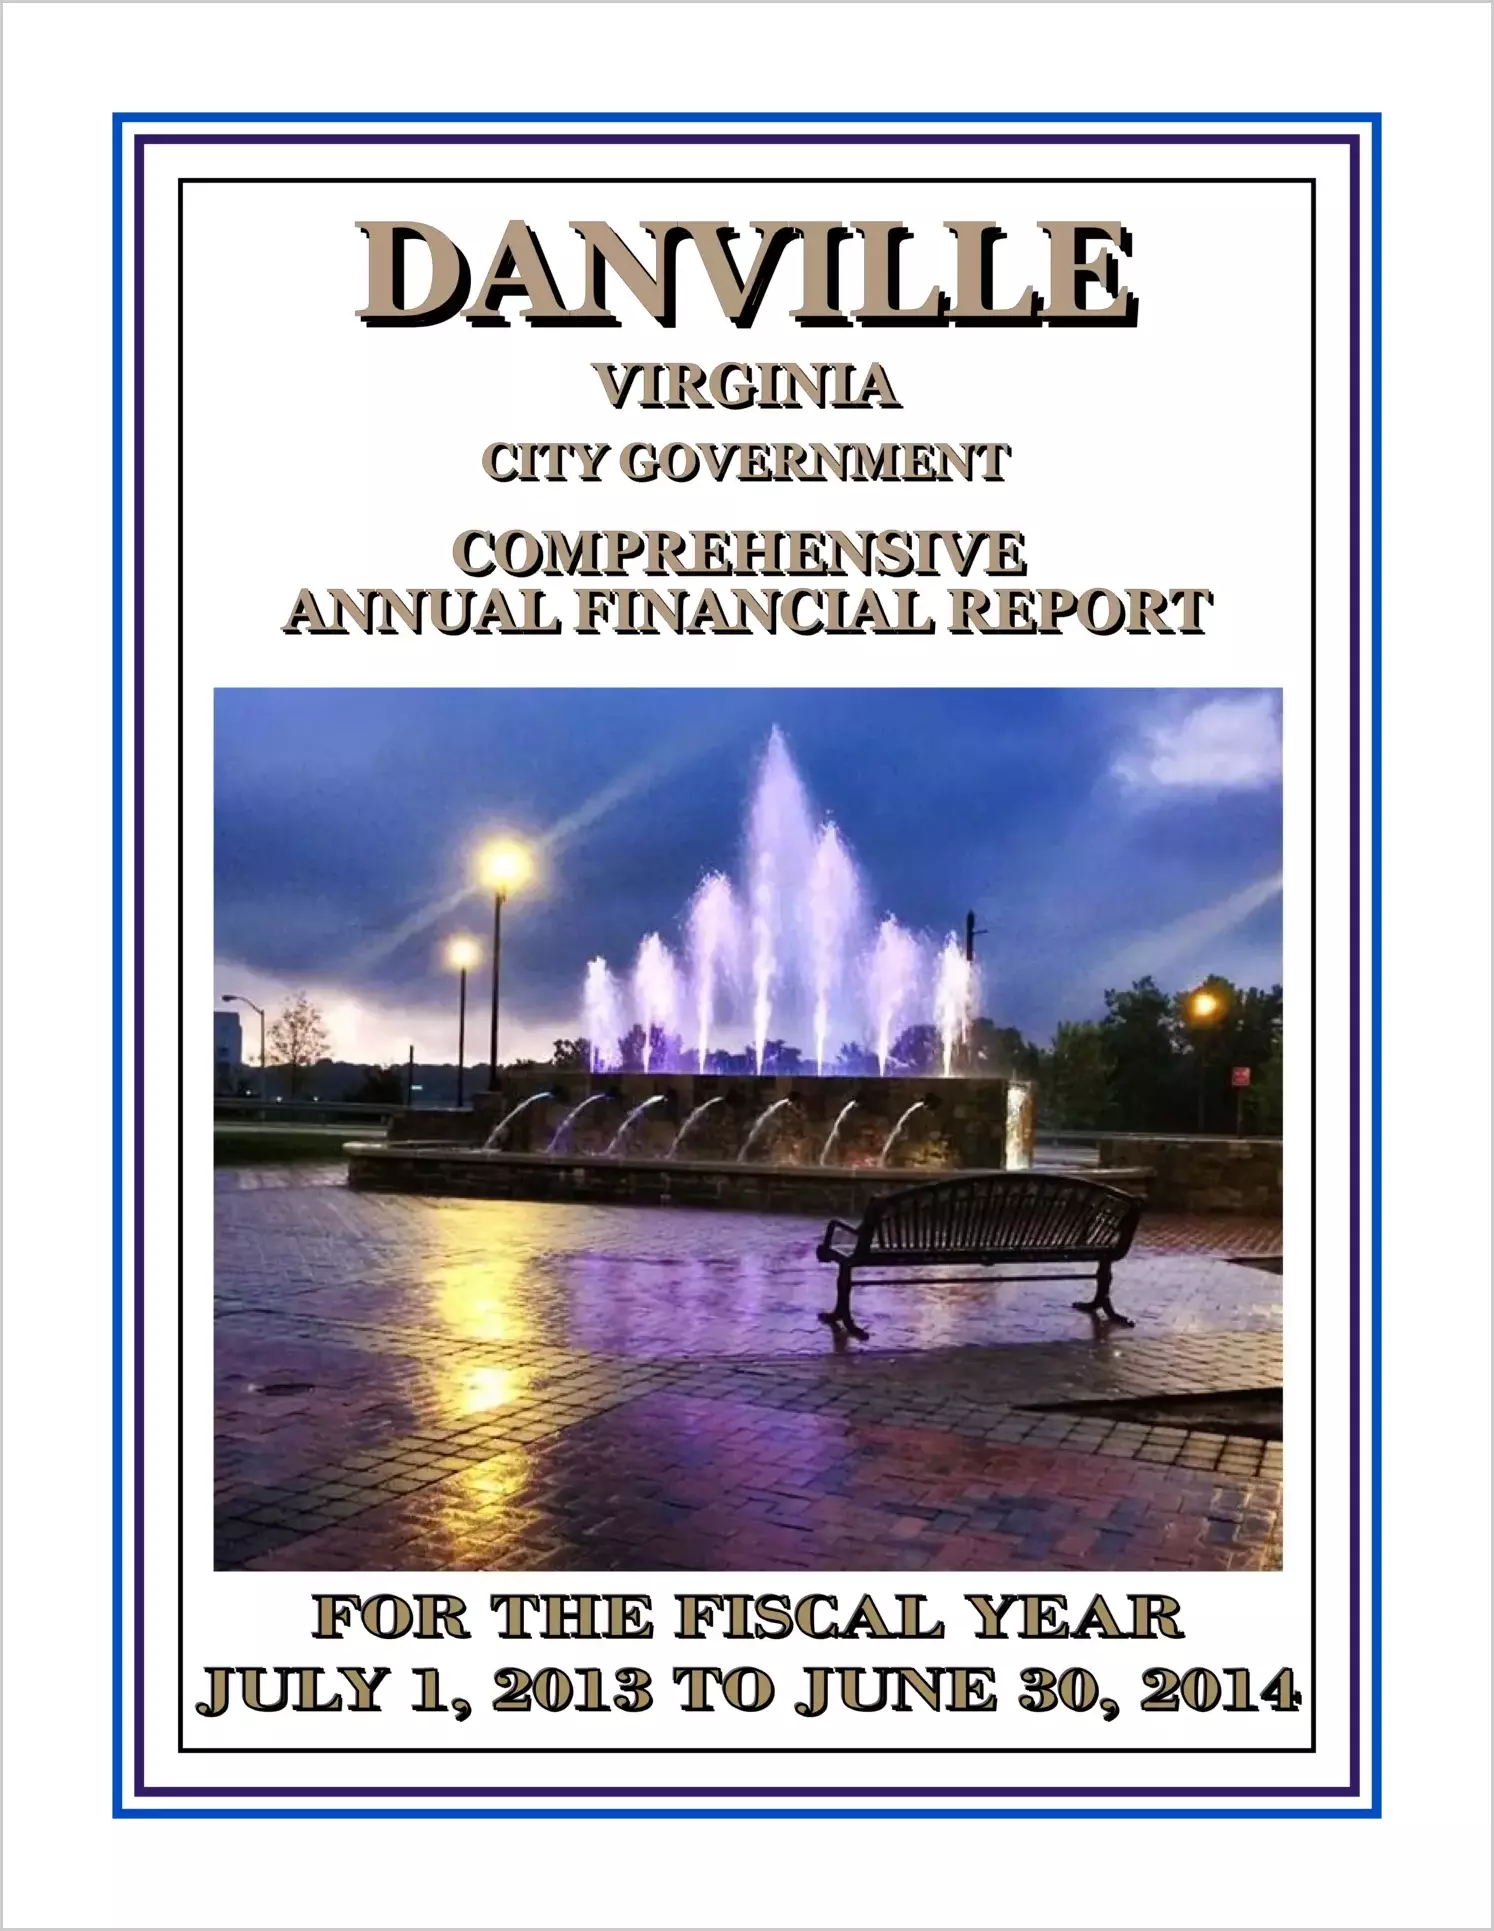 2014 Annual Financial Report for City of Danville